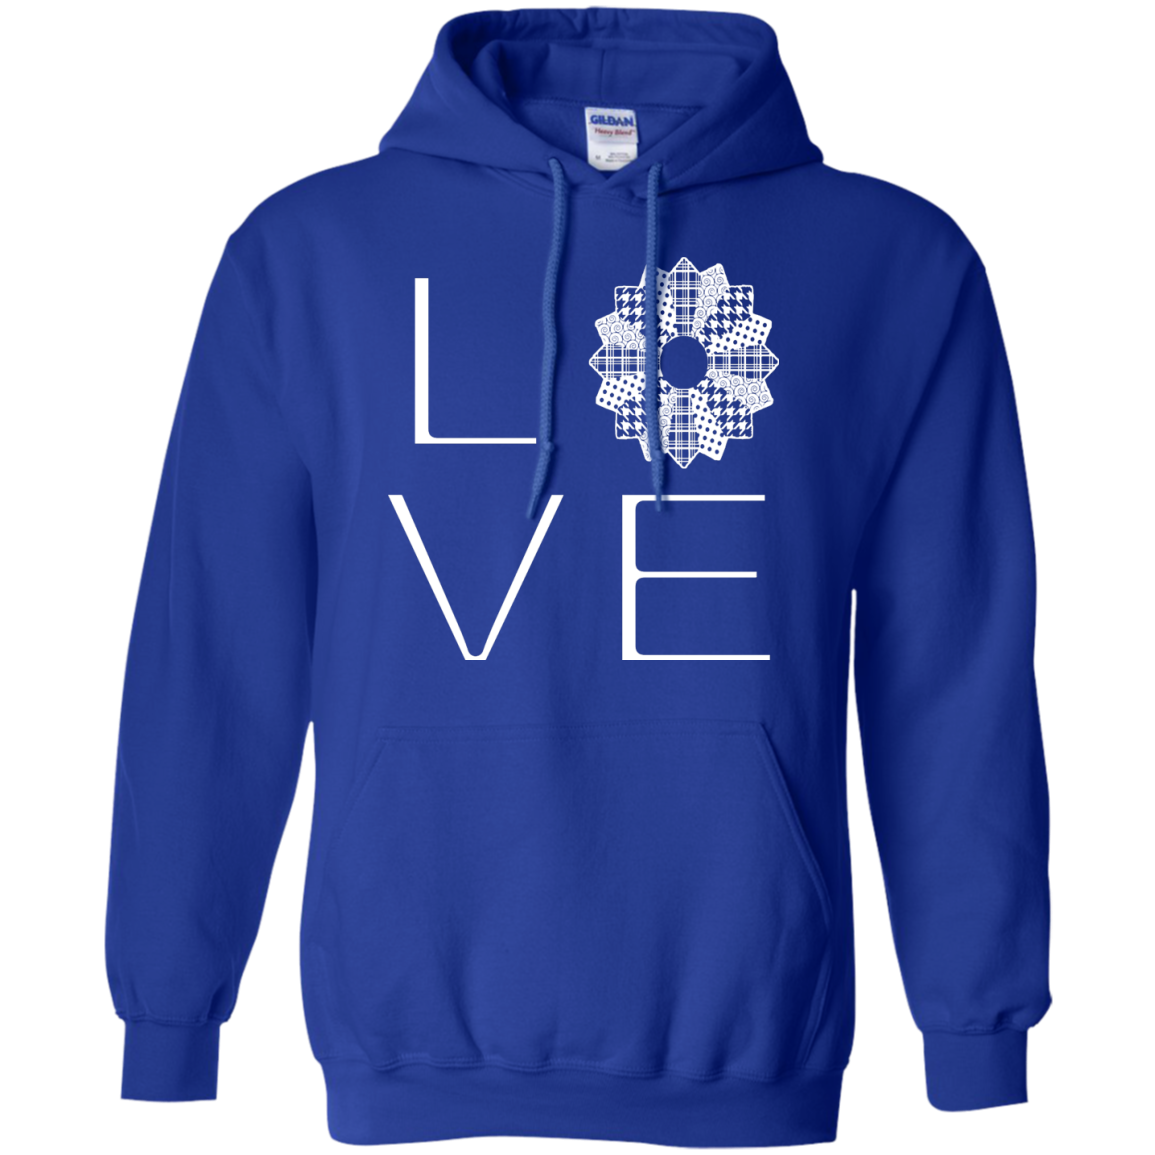 LOVE Quilting Pullover Hoodies - Crafter4Life - 6